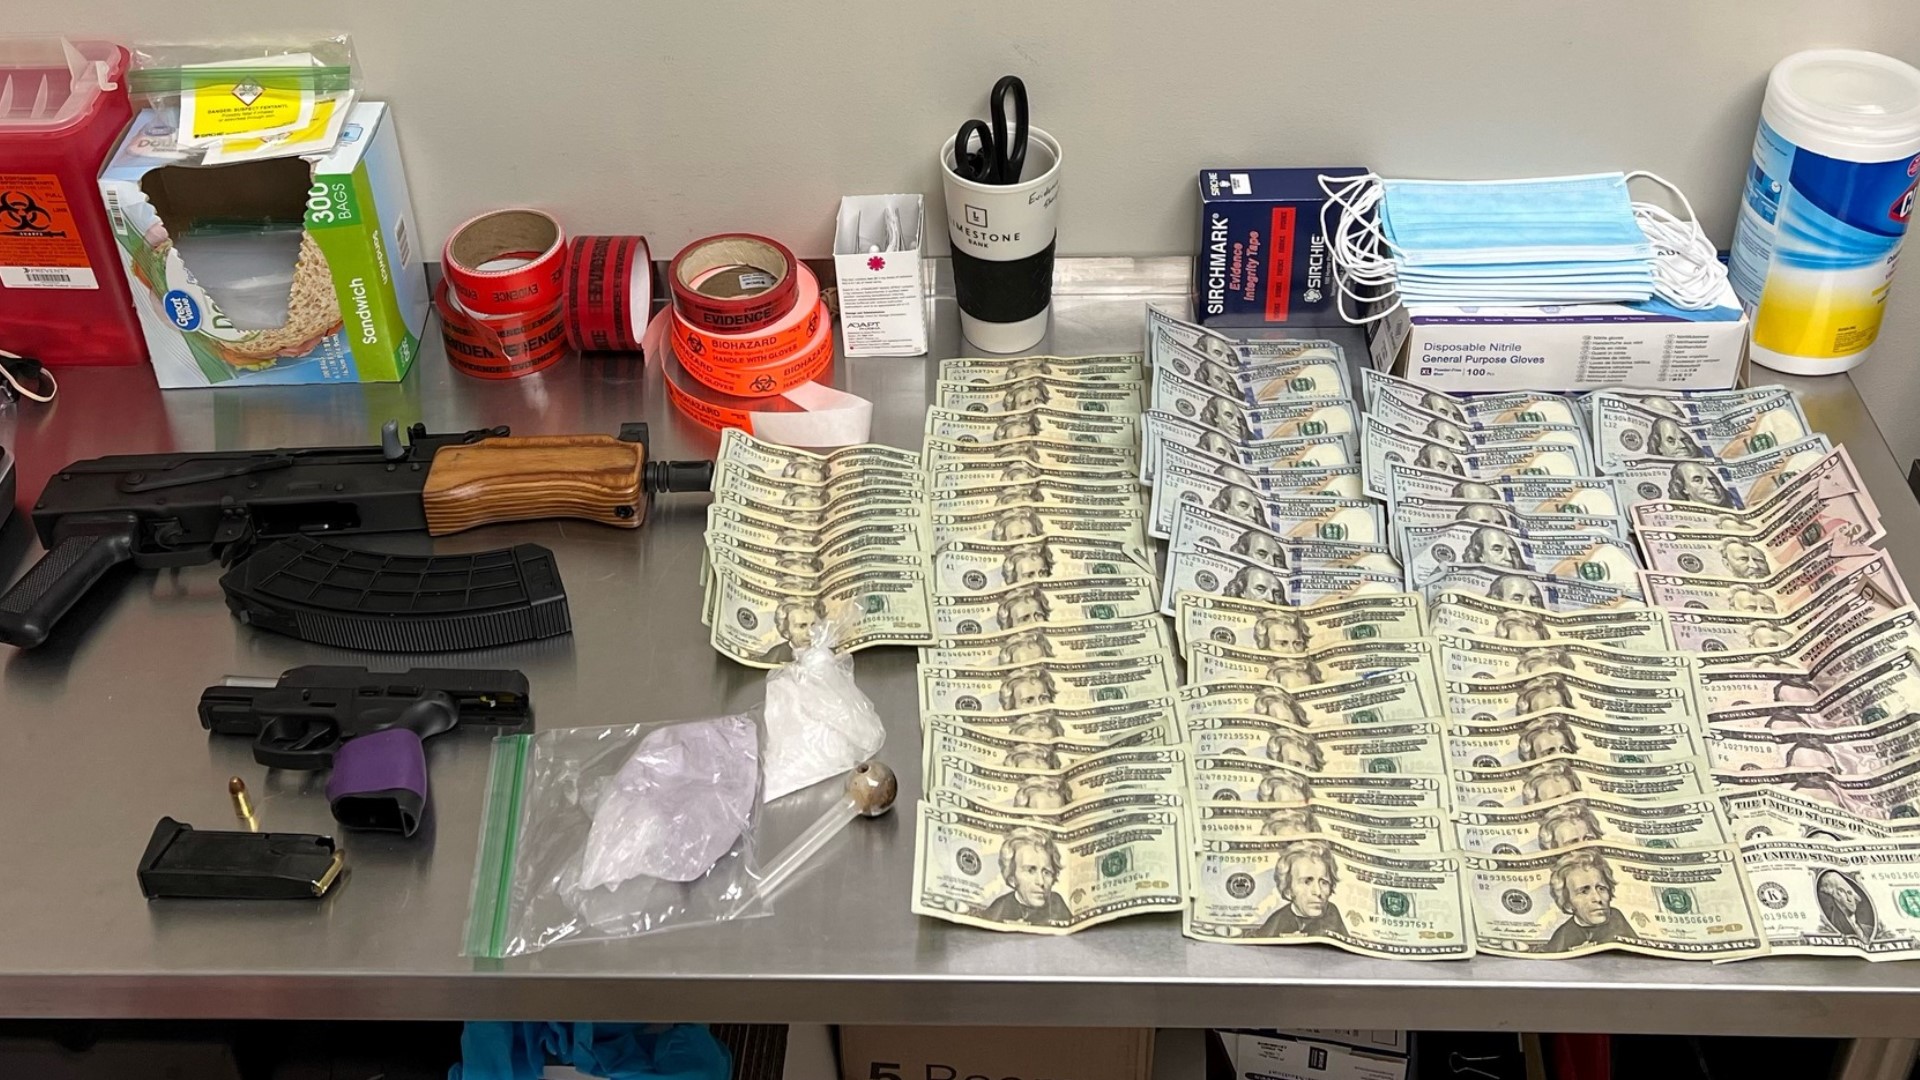 Police said officers found suspected meth, a powdered substance suspected of containing fentanyl, cash, two guns and a clear pipe.